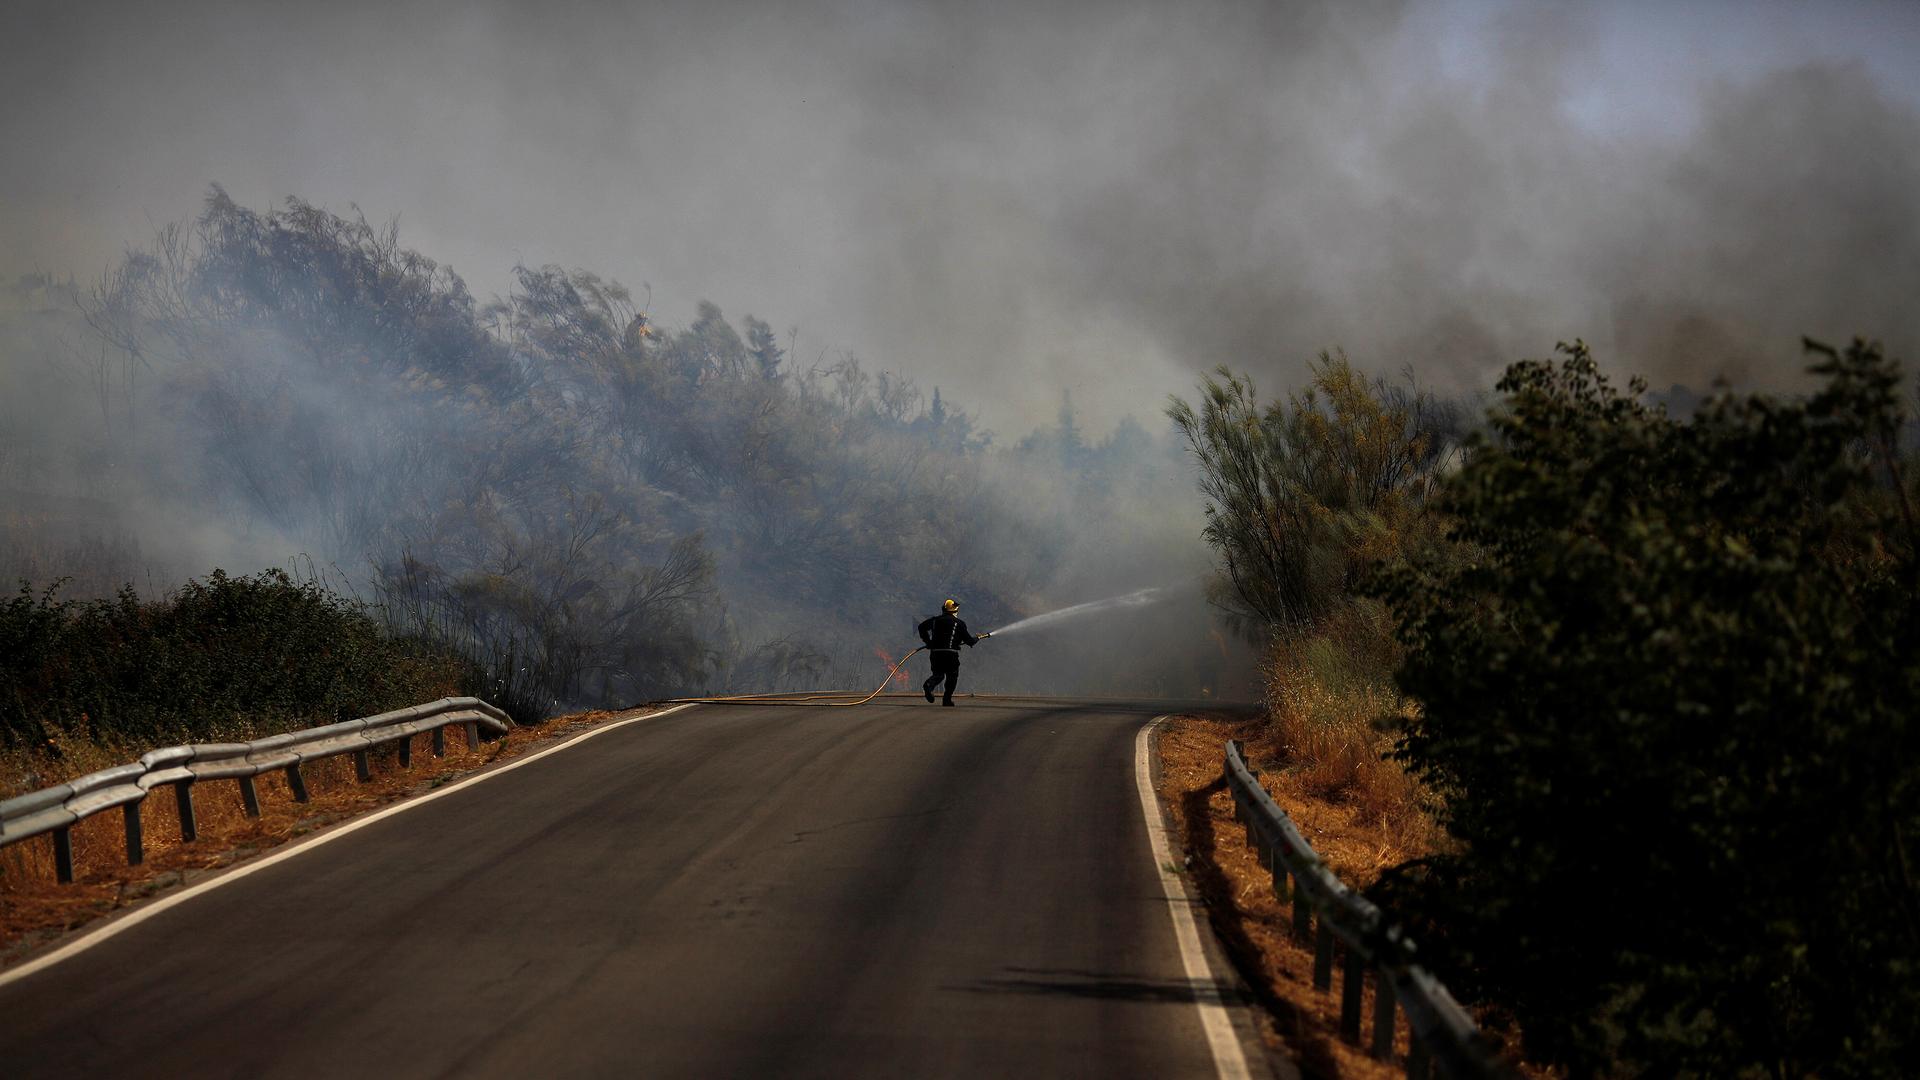 A firefighter works to put out a forest fire during a June heatwave in Southern Spain. Fires have plagued much of southern Europe this summer as the region has been hit by intense heat and drought.